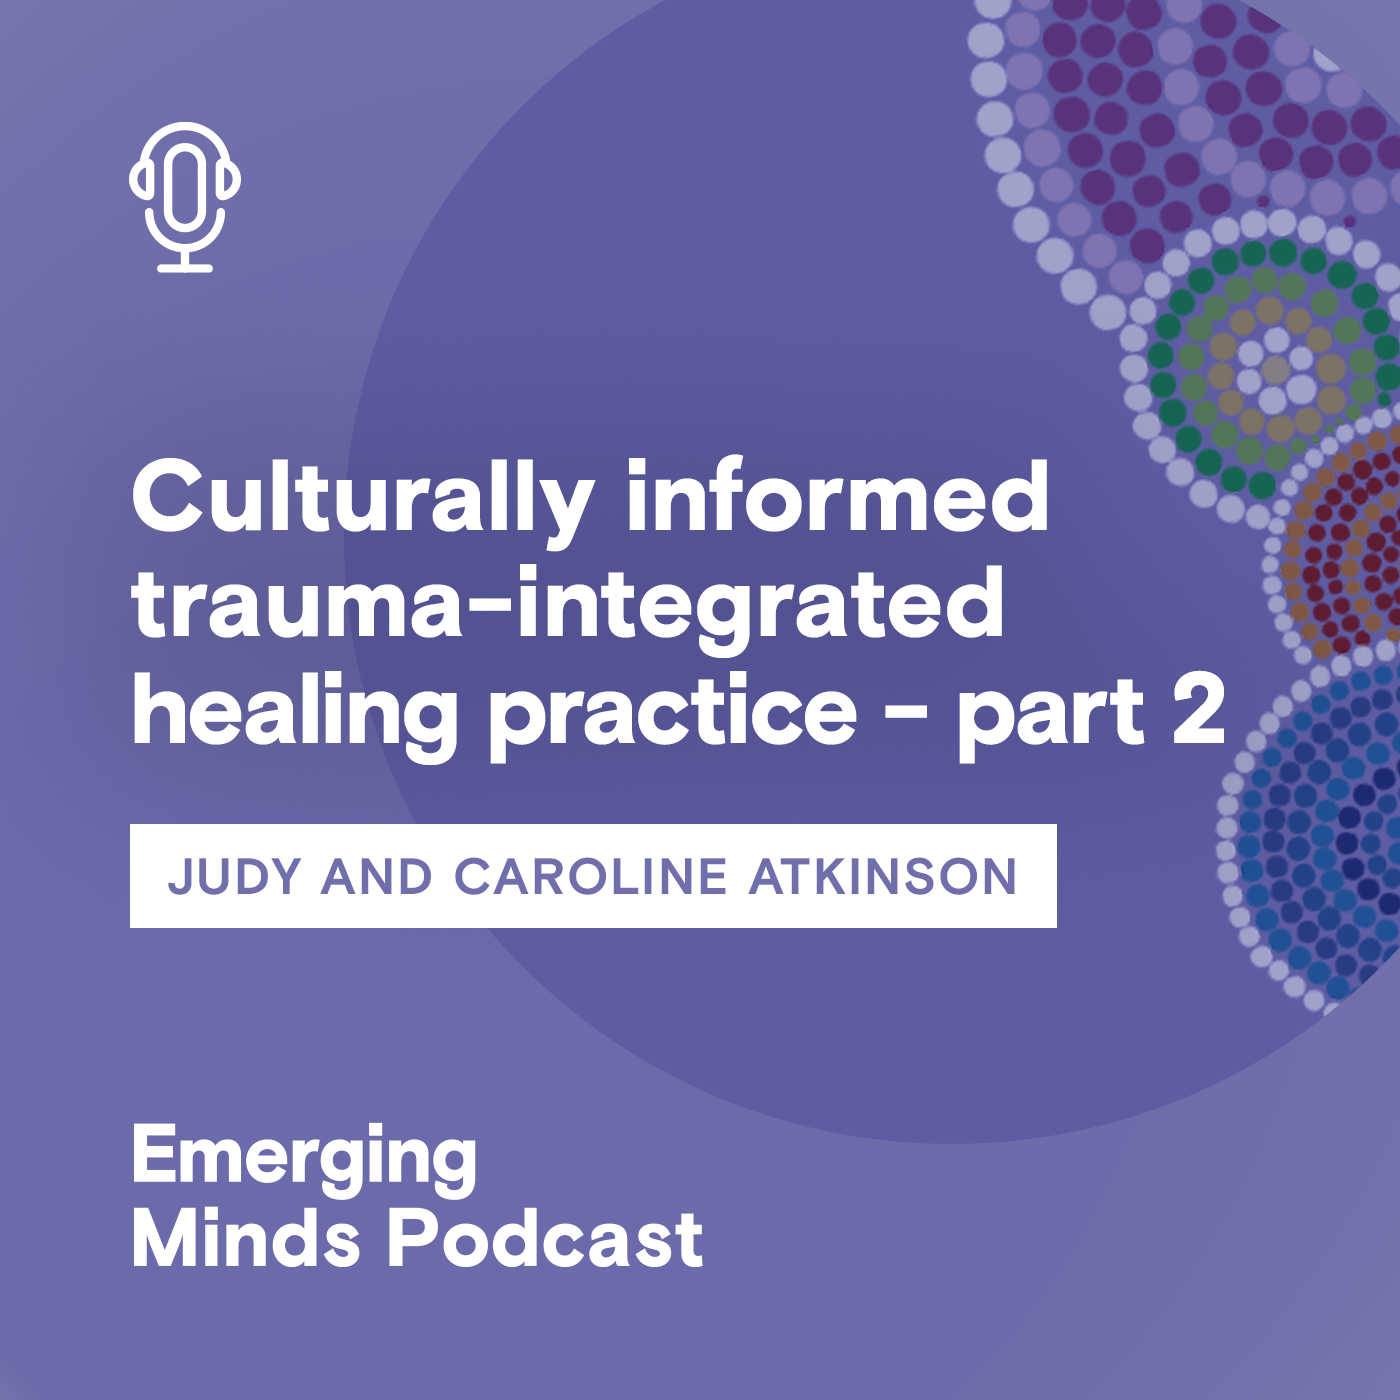 Culturally informed trauma-integrated healing practice - part 2